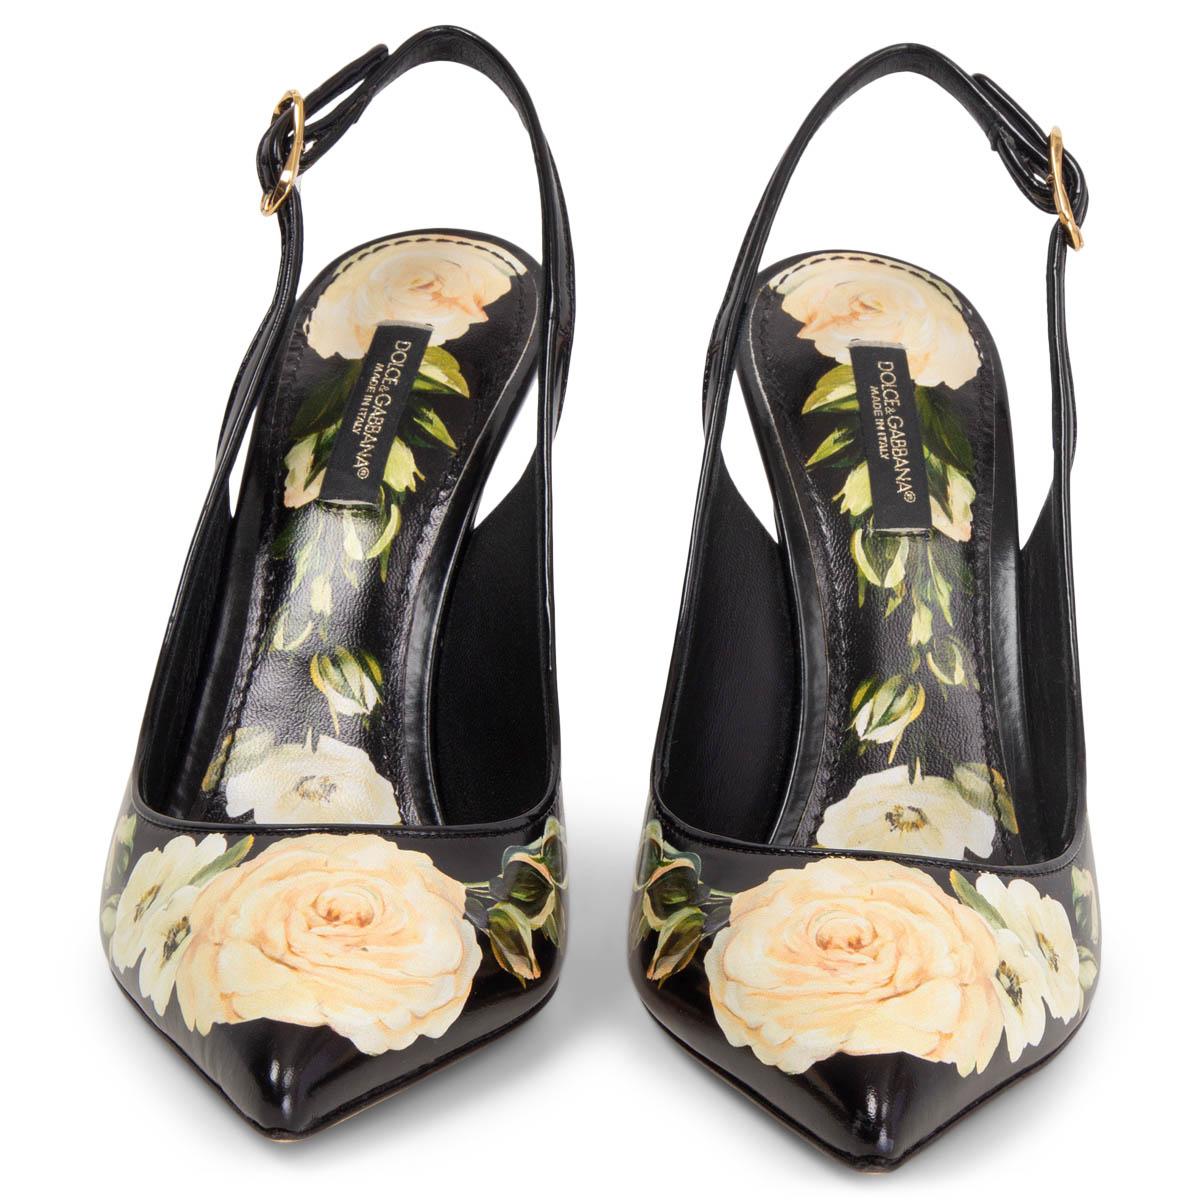 100% authentic Dolce & Gabbana slingbacks in black, off-white, green and pale apricot rose printed leather. Have been worn once or twice inside and are in excellent condition. 

Measurements
Imprinted Size	39
Shoe Size	39
Inside Sole	25.5cm